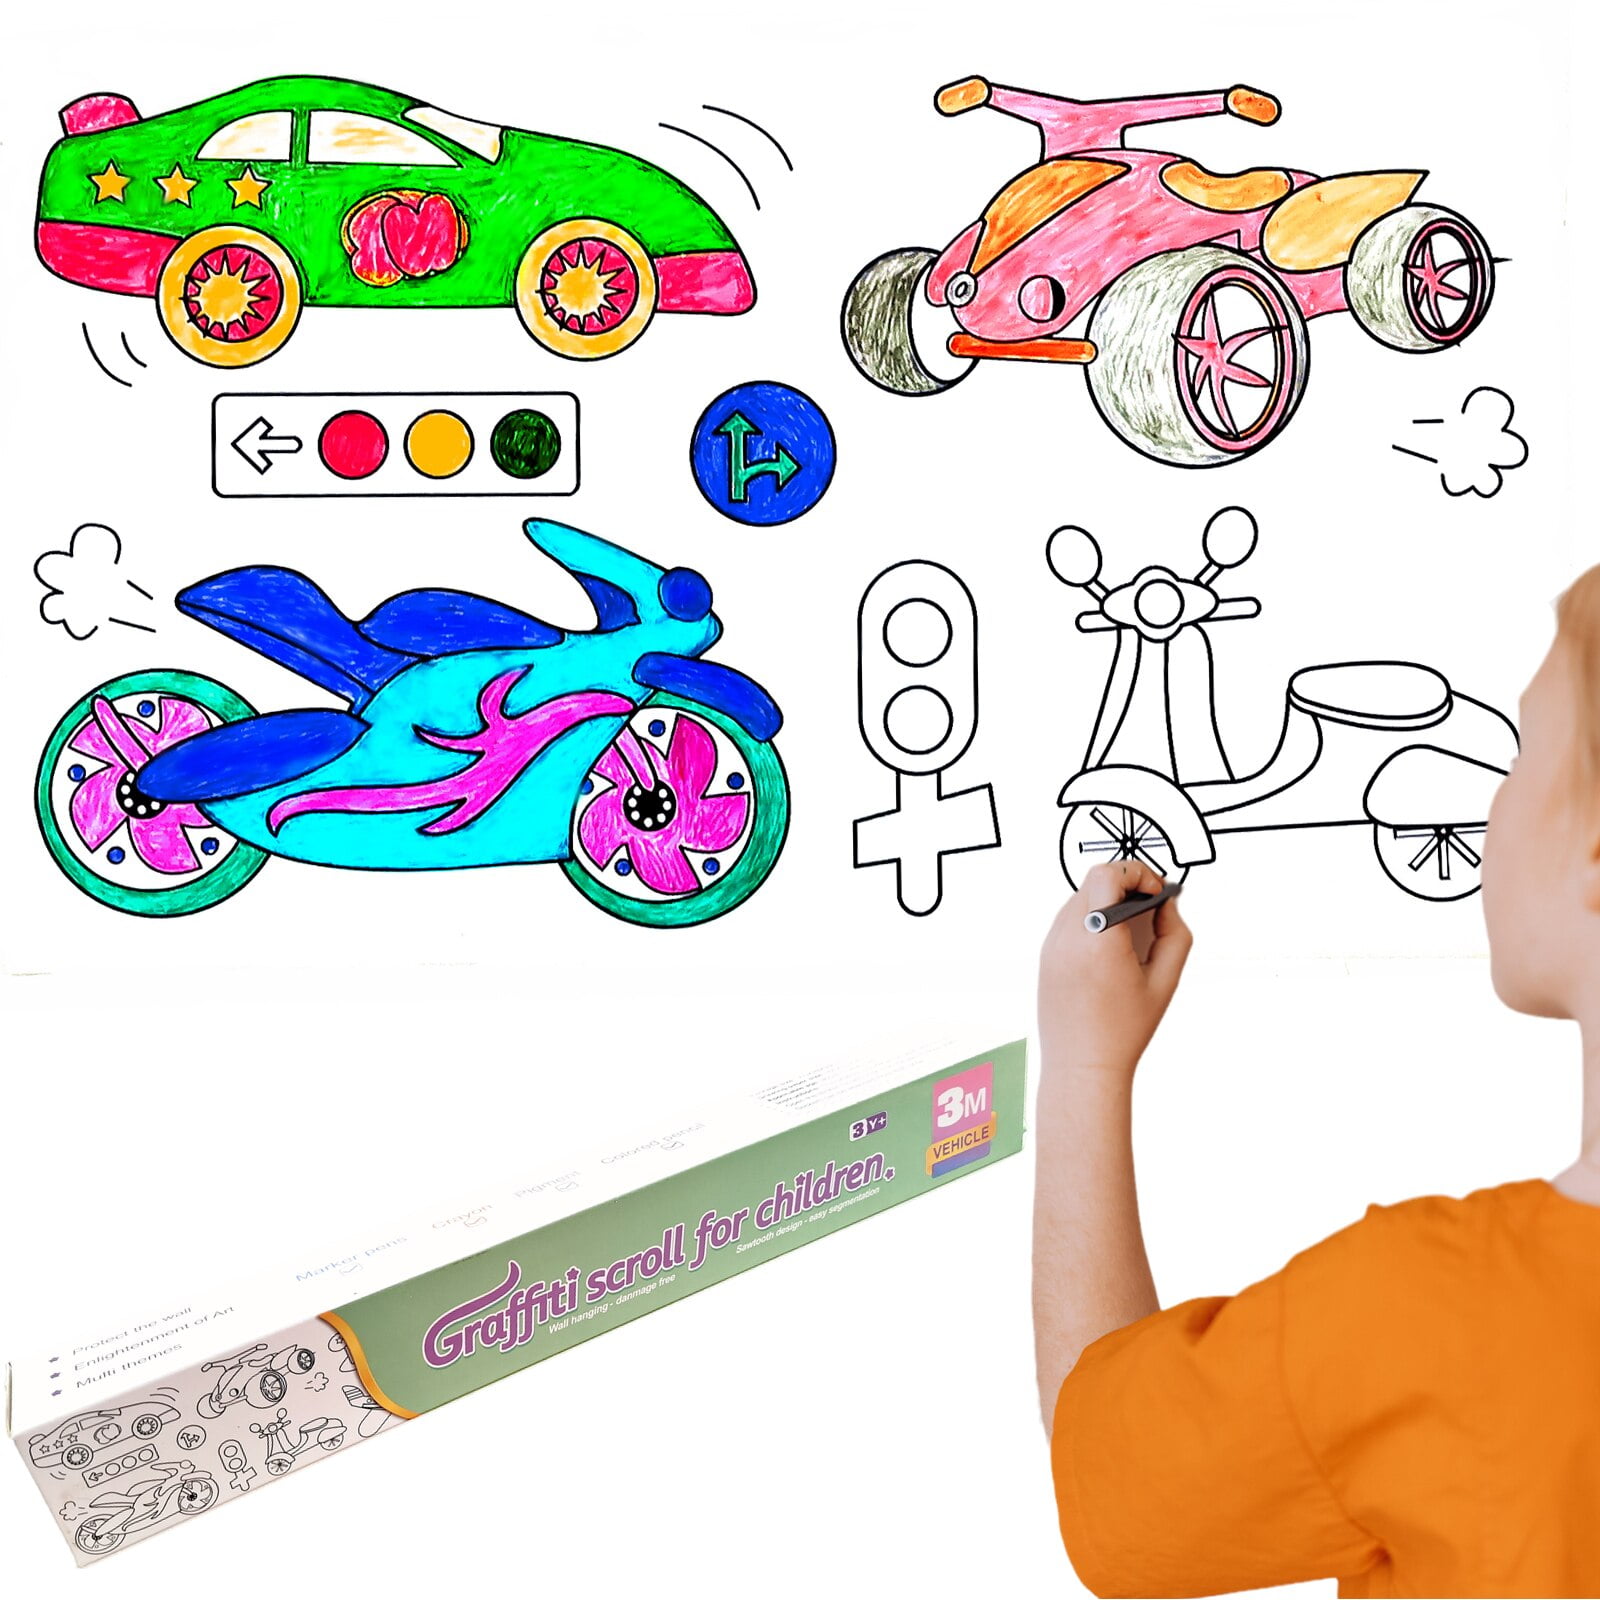 kumrabal childrens drawing roll, coloring drawing roll of paper for kids  ages 4-8, 11811.8 inch diy sticky drawing paper roll for todd